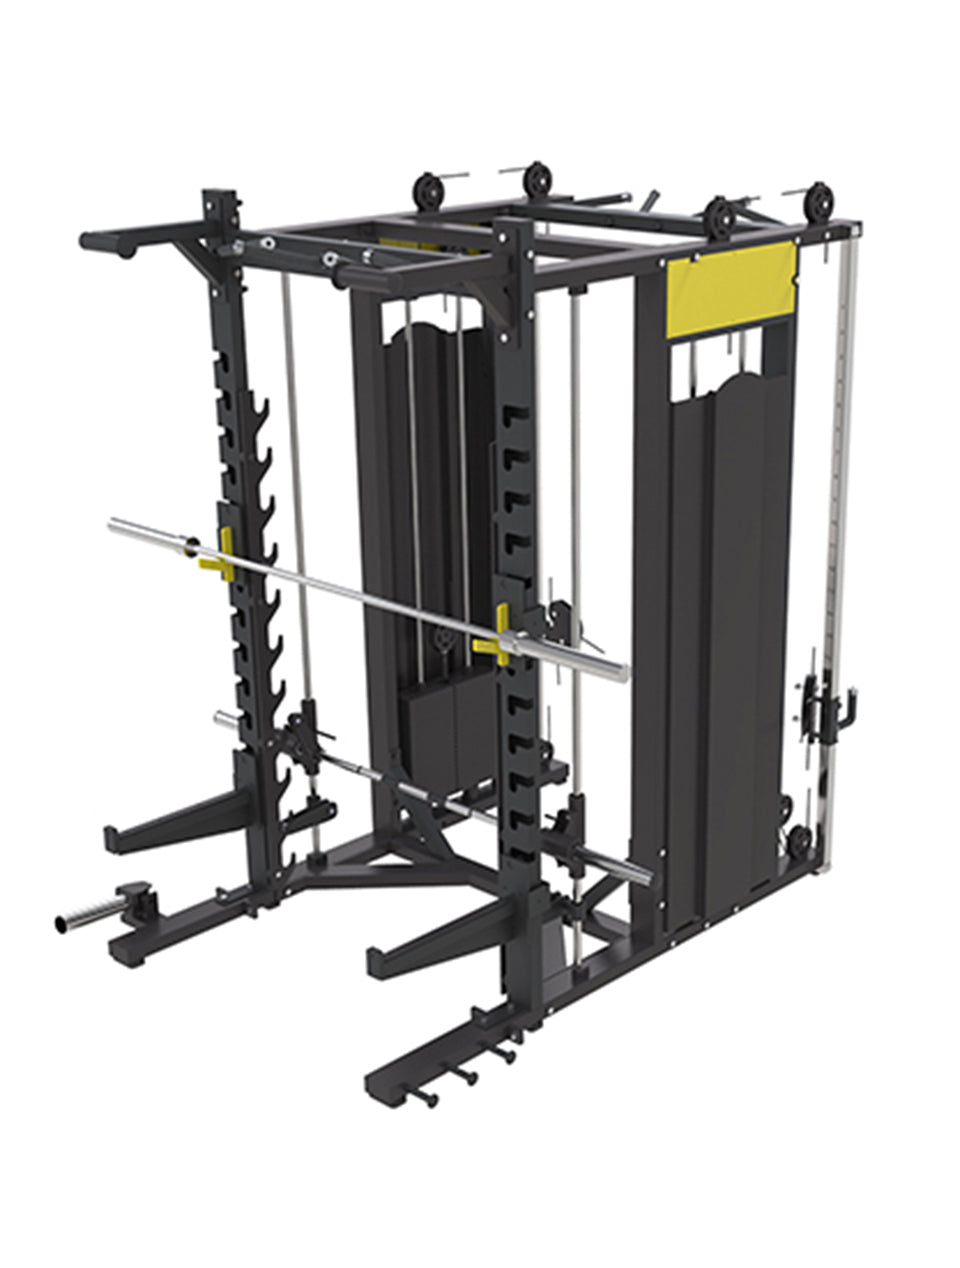 The PRIME Functional Trainer all blacked out and ready for shipment! . . .  #primefitness #findyourprime #smartstrength #trainsmart #homeg